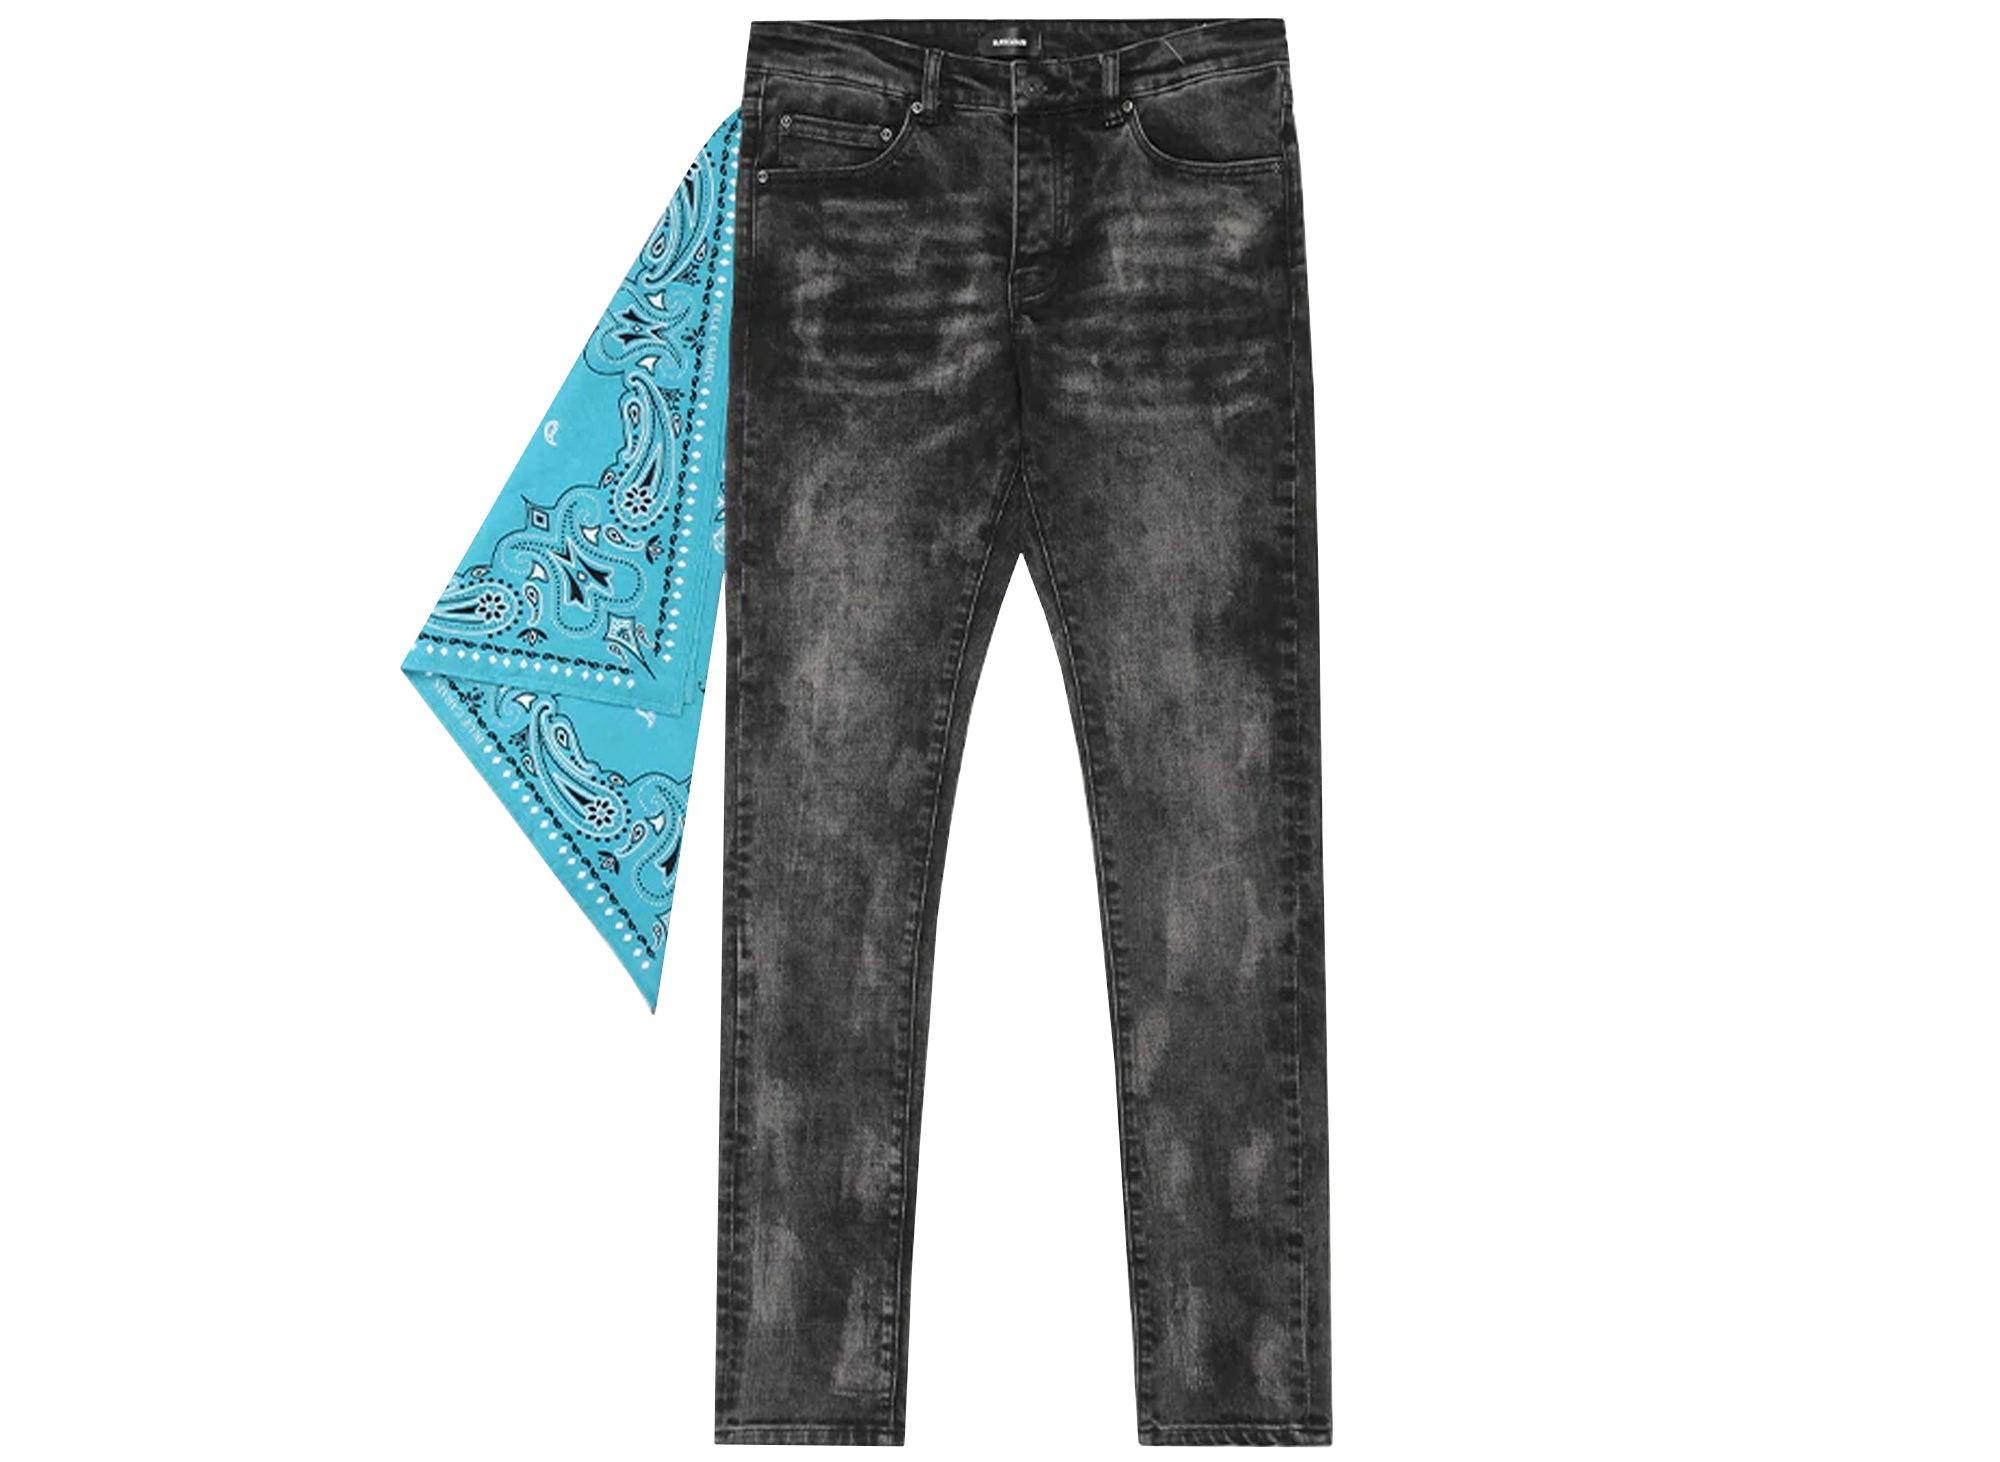 BLUECARATS The Pocket Fit Boutique – Slim 5 McQueen Oneness Jeans